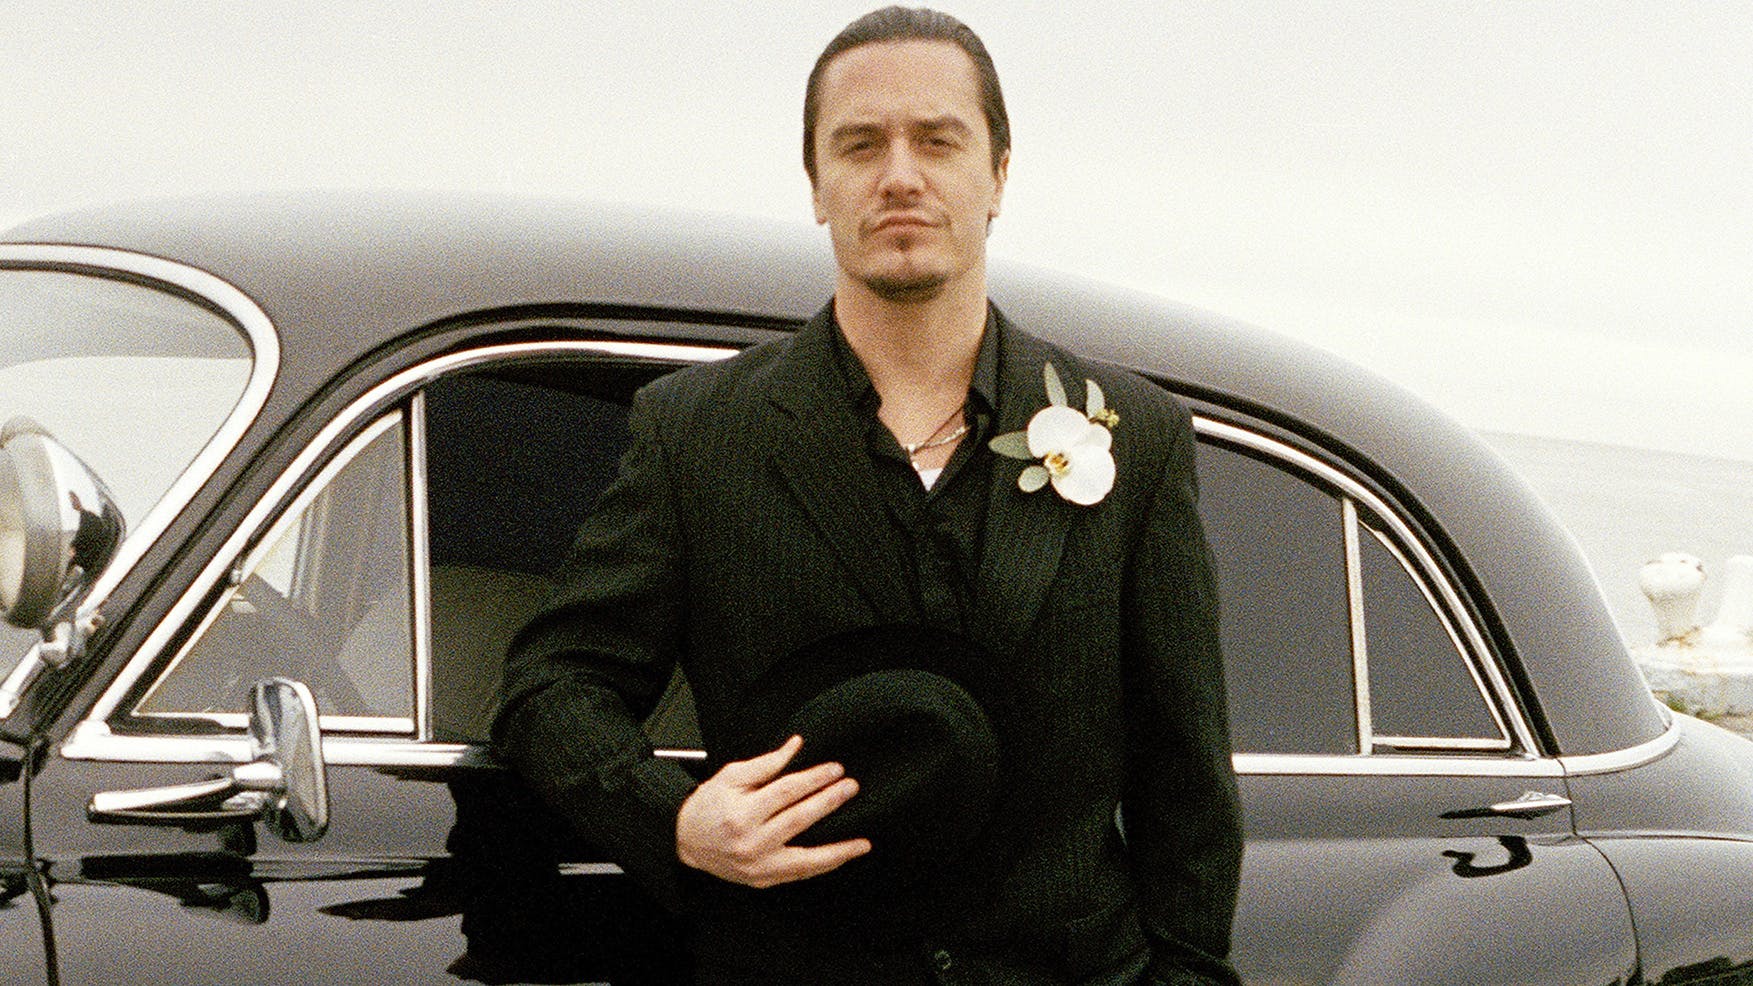 I Love You, Mike Patton